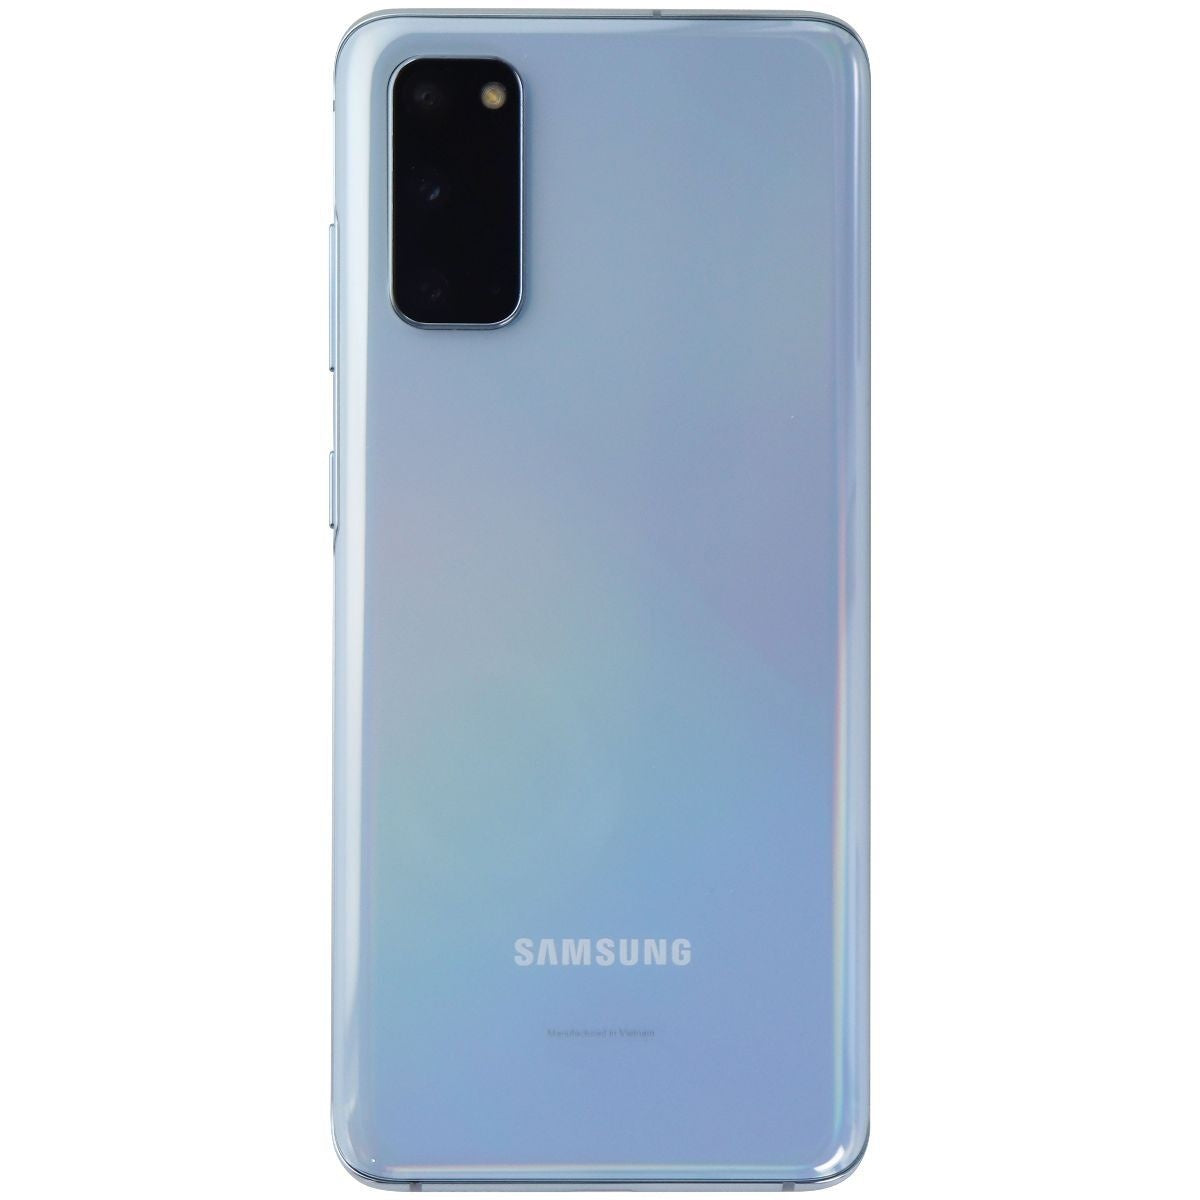 Samsung Galaxy S20 5G (6.2-in) (SM-G981U1) T-Mobile Only - 128GB/Cloud Blue Cell Phones & Smartphones Samsung    - Simple Cell Bulk Wholesale Pricing - USA Seller